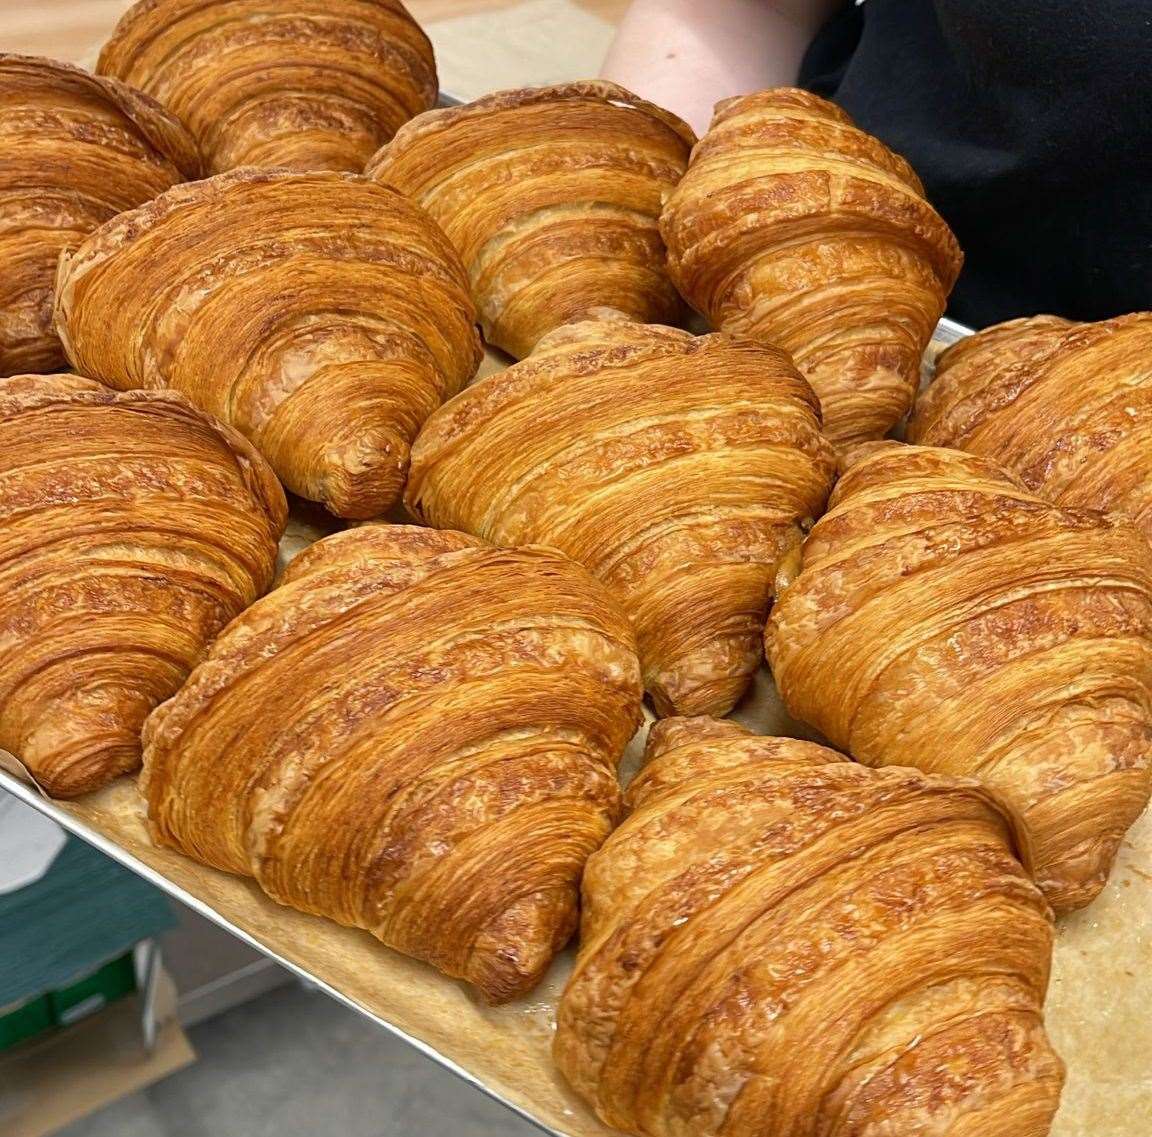 A batch of freshly-made croissants. Picture: Mia Dahl